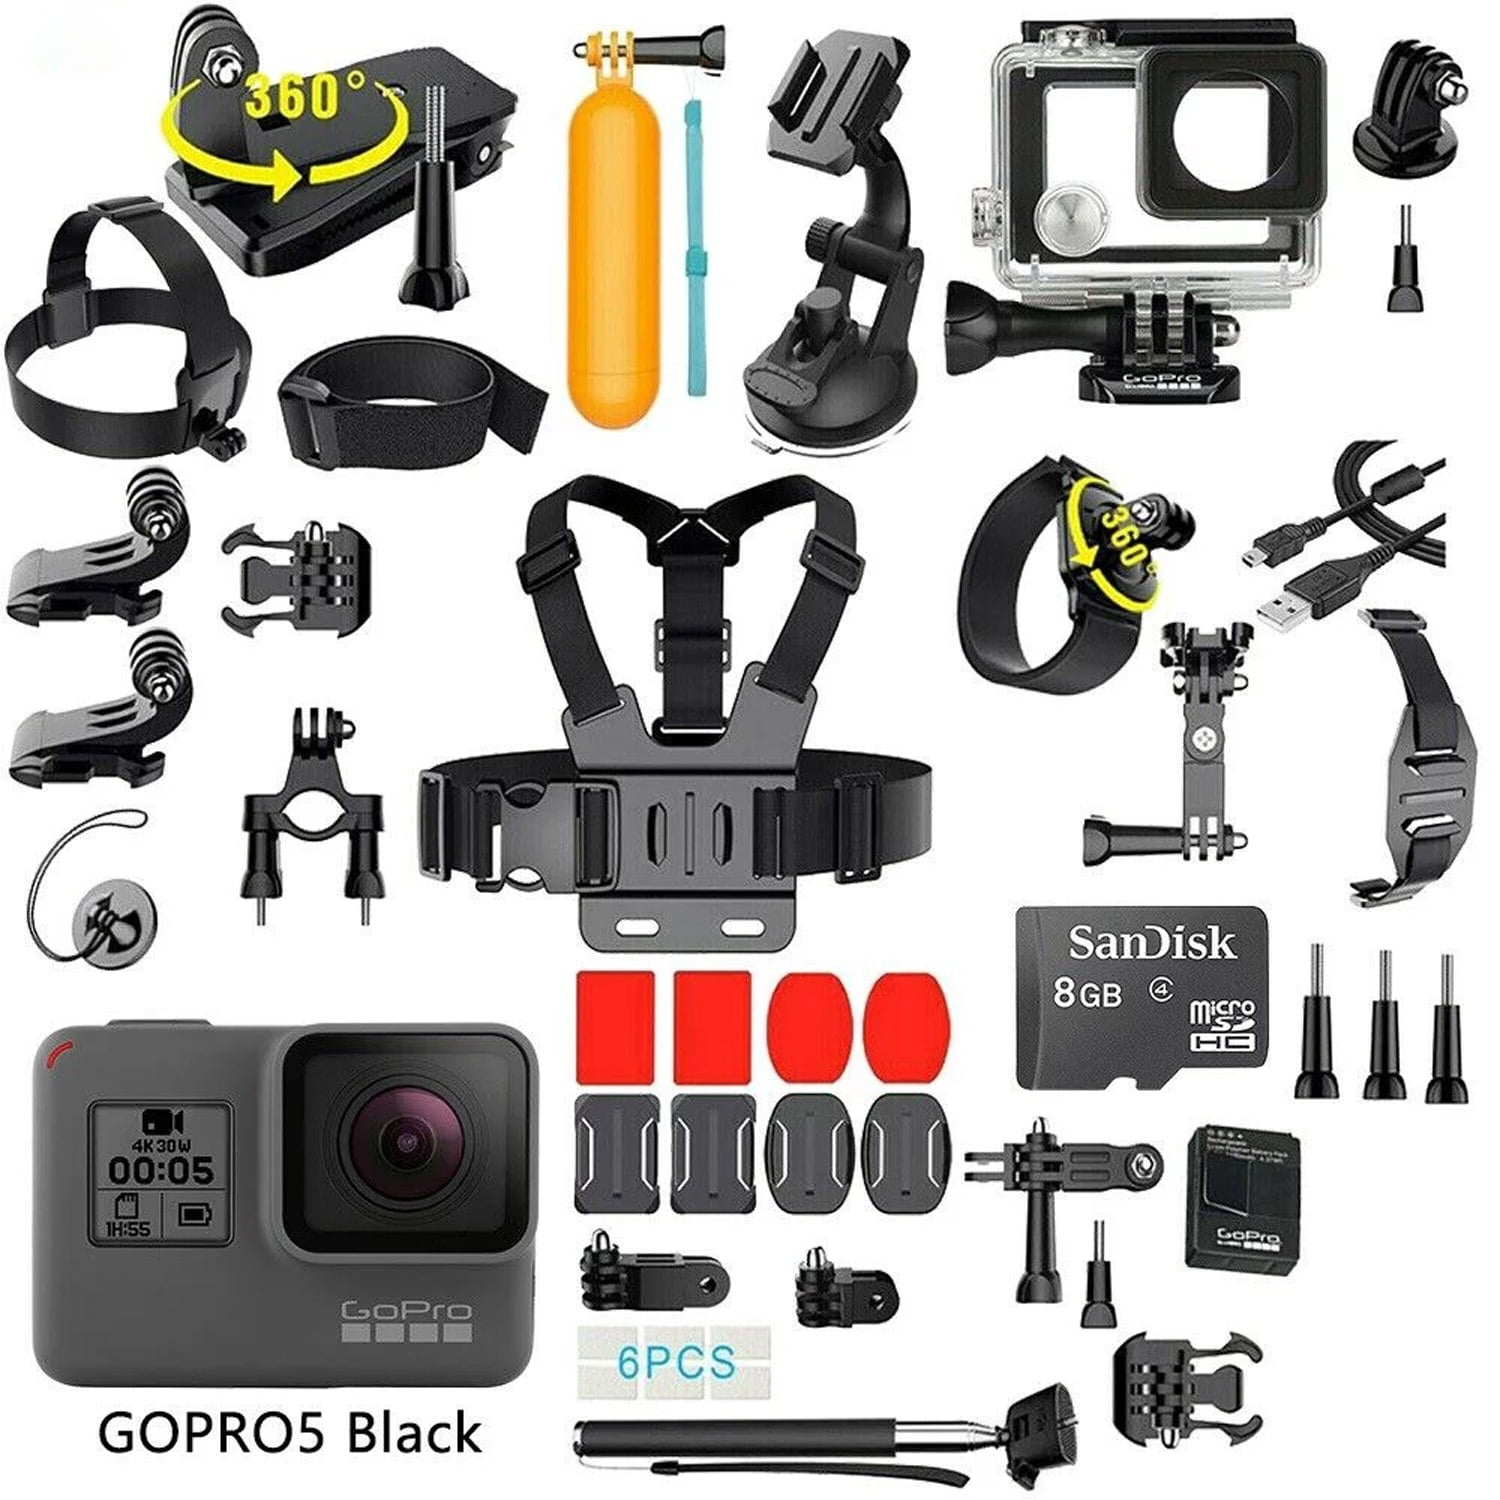 fossil is Formand Restored GoPro HERO 5 Black Edition 4K Action Sport Camera CHDHX501 With  35in1 GoPro Action Camera Accessories Kit ECommerce Package (Refurbished) -  Walmart.com